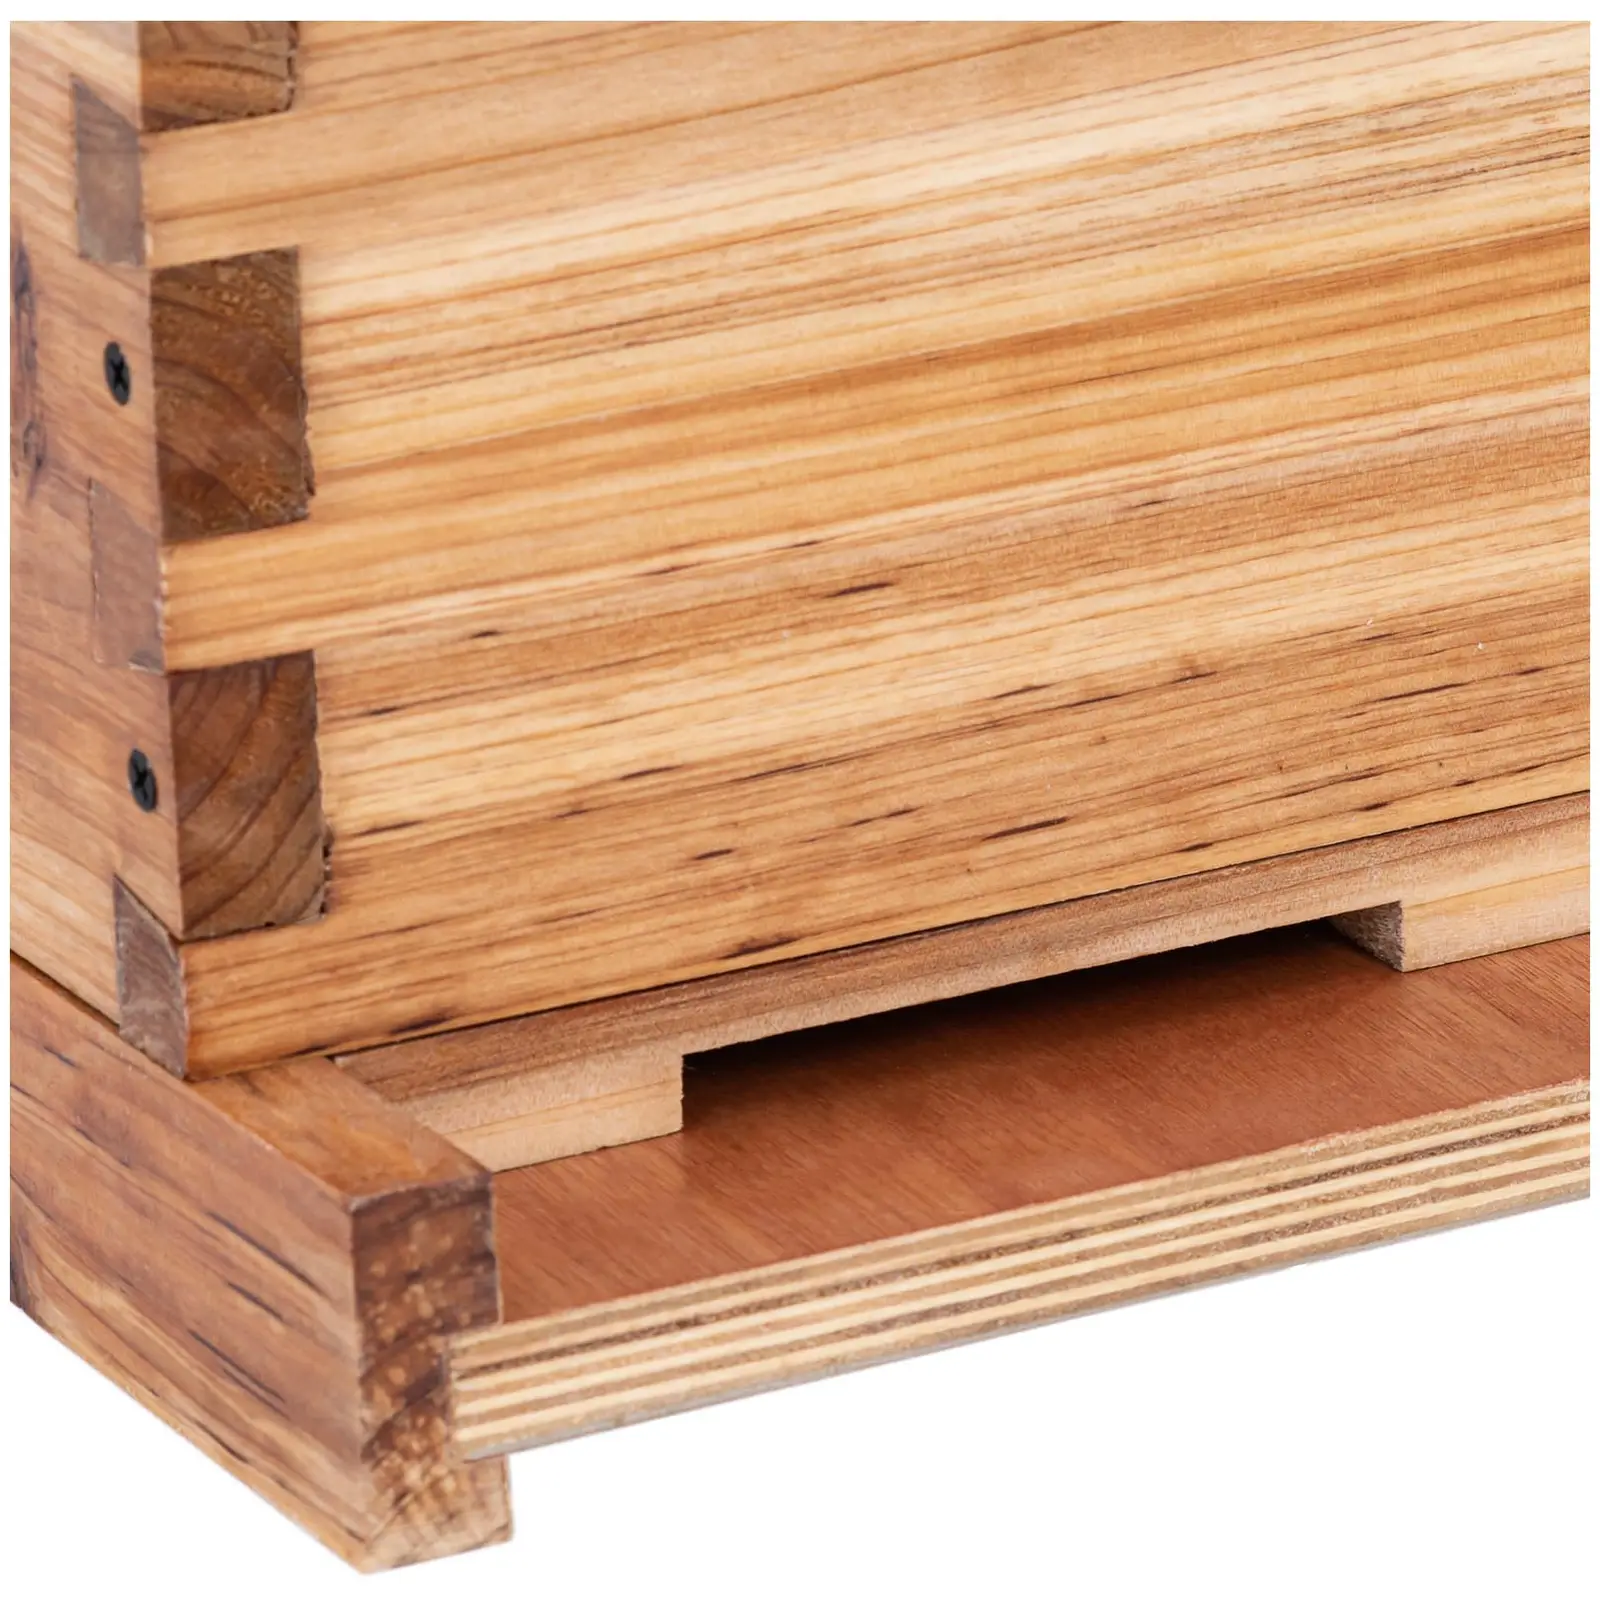 Factory second Langenstroth beehive–2 frames and base cassette with entrance hole